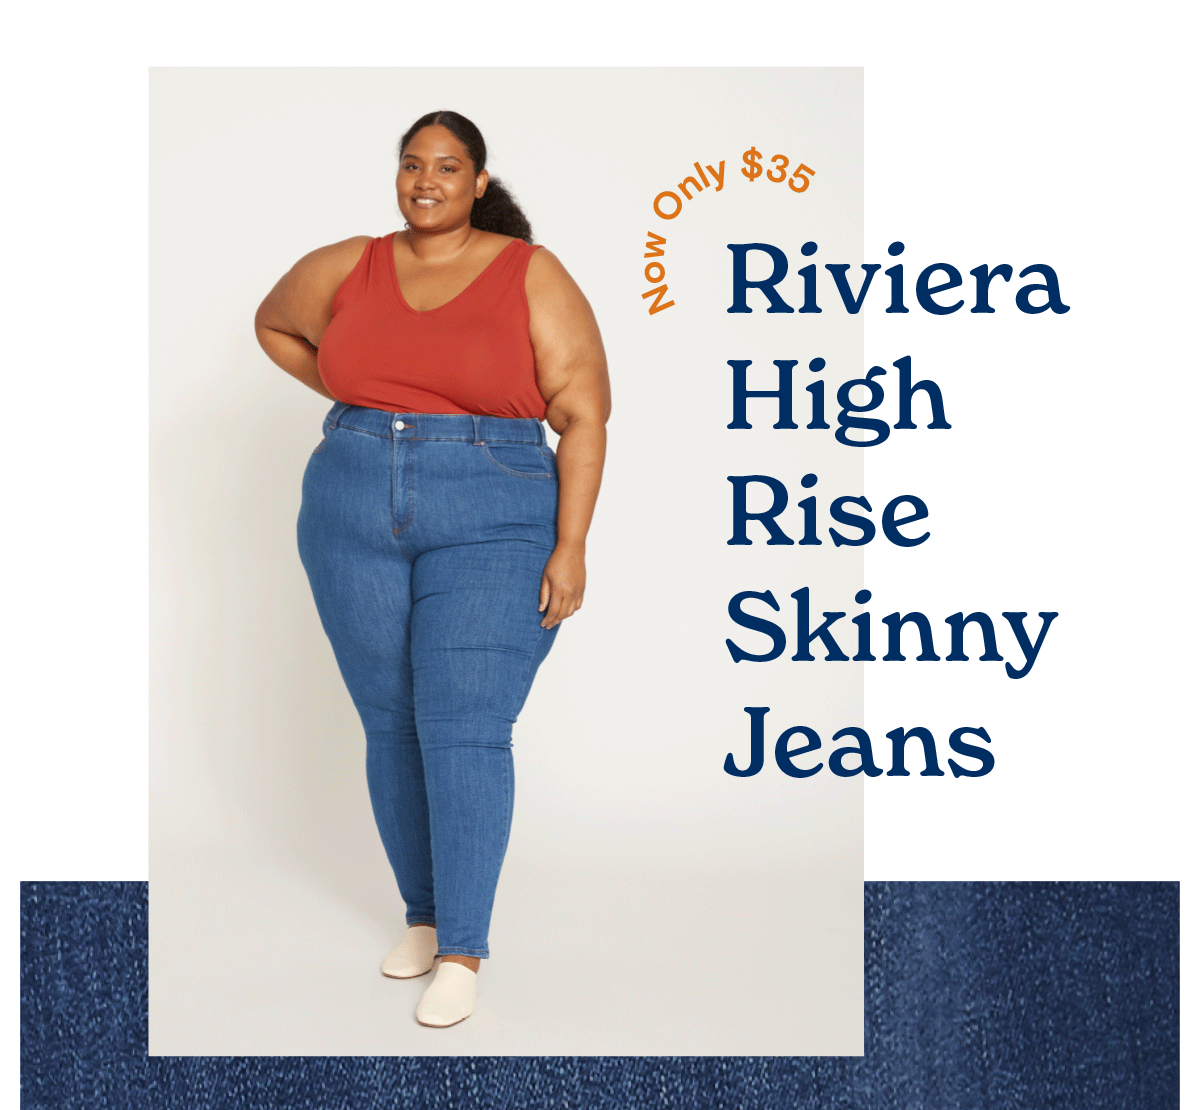 Riviera high rise skinny jeans are only $35